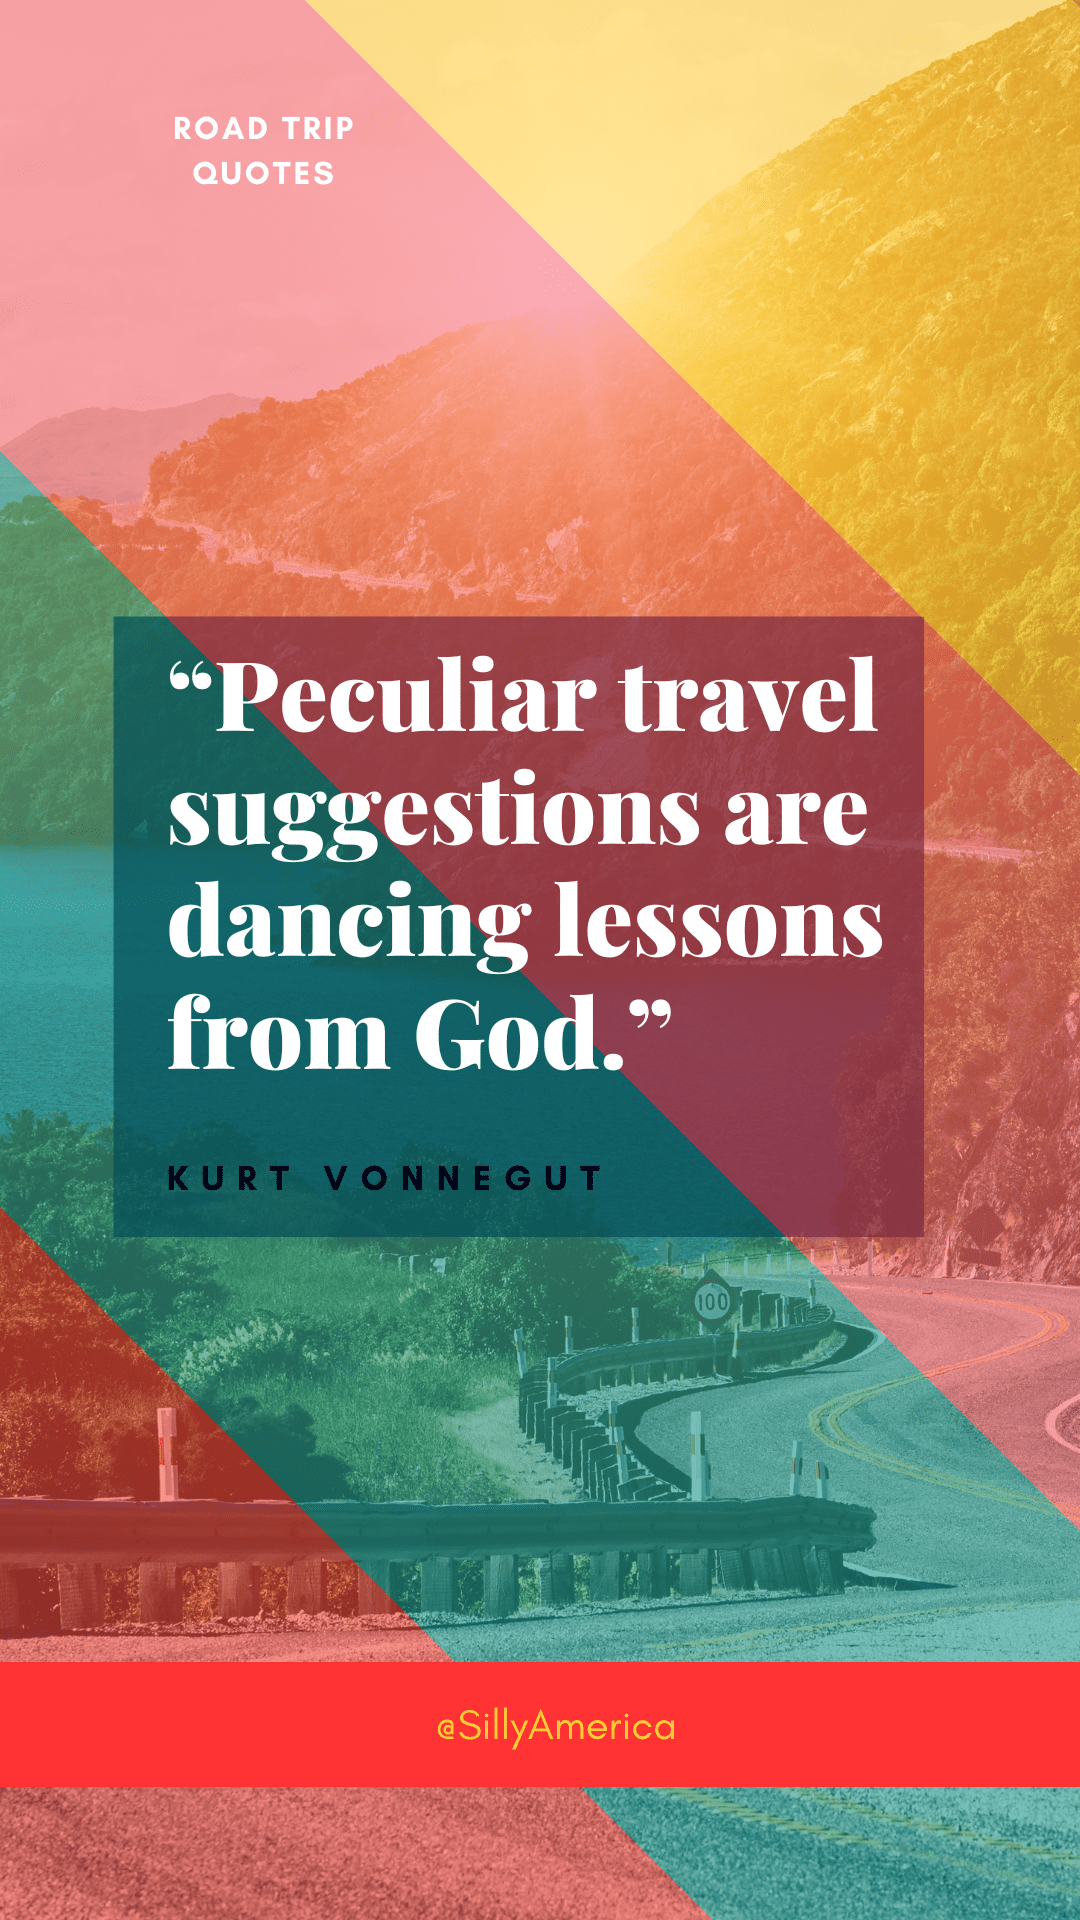 “Peculiar travel suggestions are dancing lessons from God.” Kurt Vonnegut, Cat’s Cradle - ROAD TRIP QUOTES